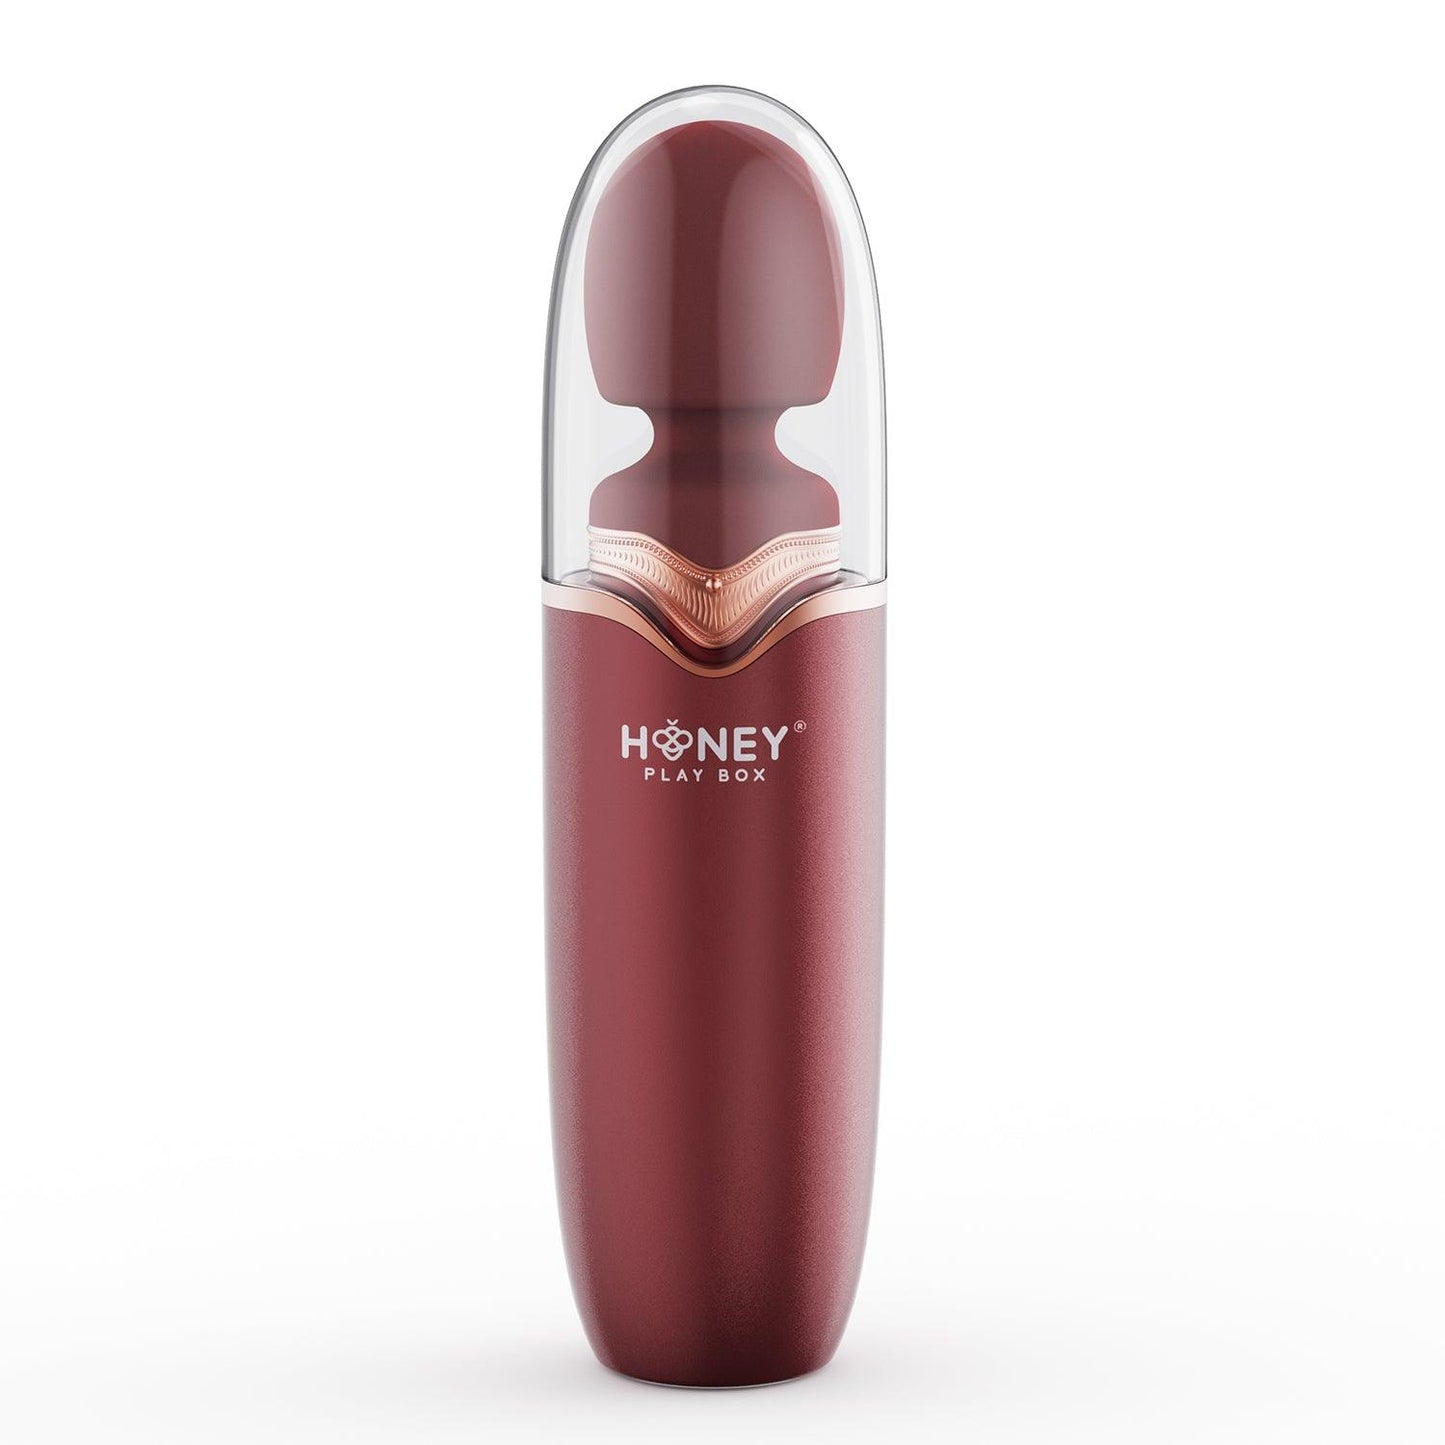 Stormi - Powerful Wand Massager - Red Wine - My Sex Toy Hub